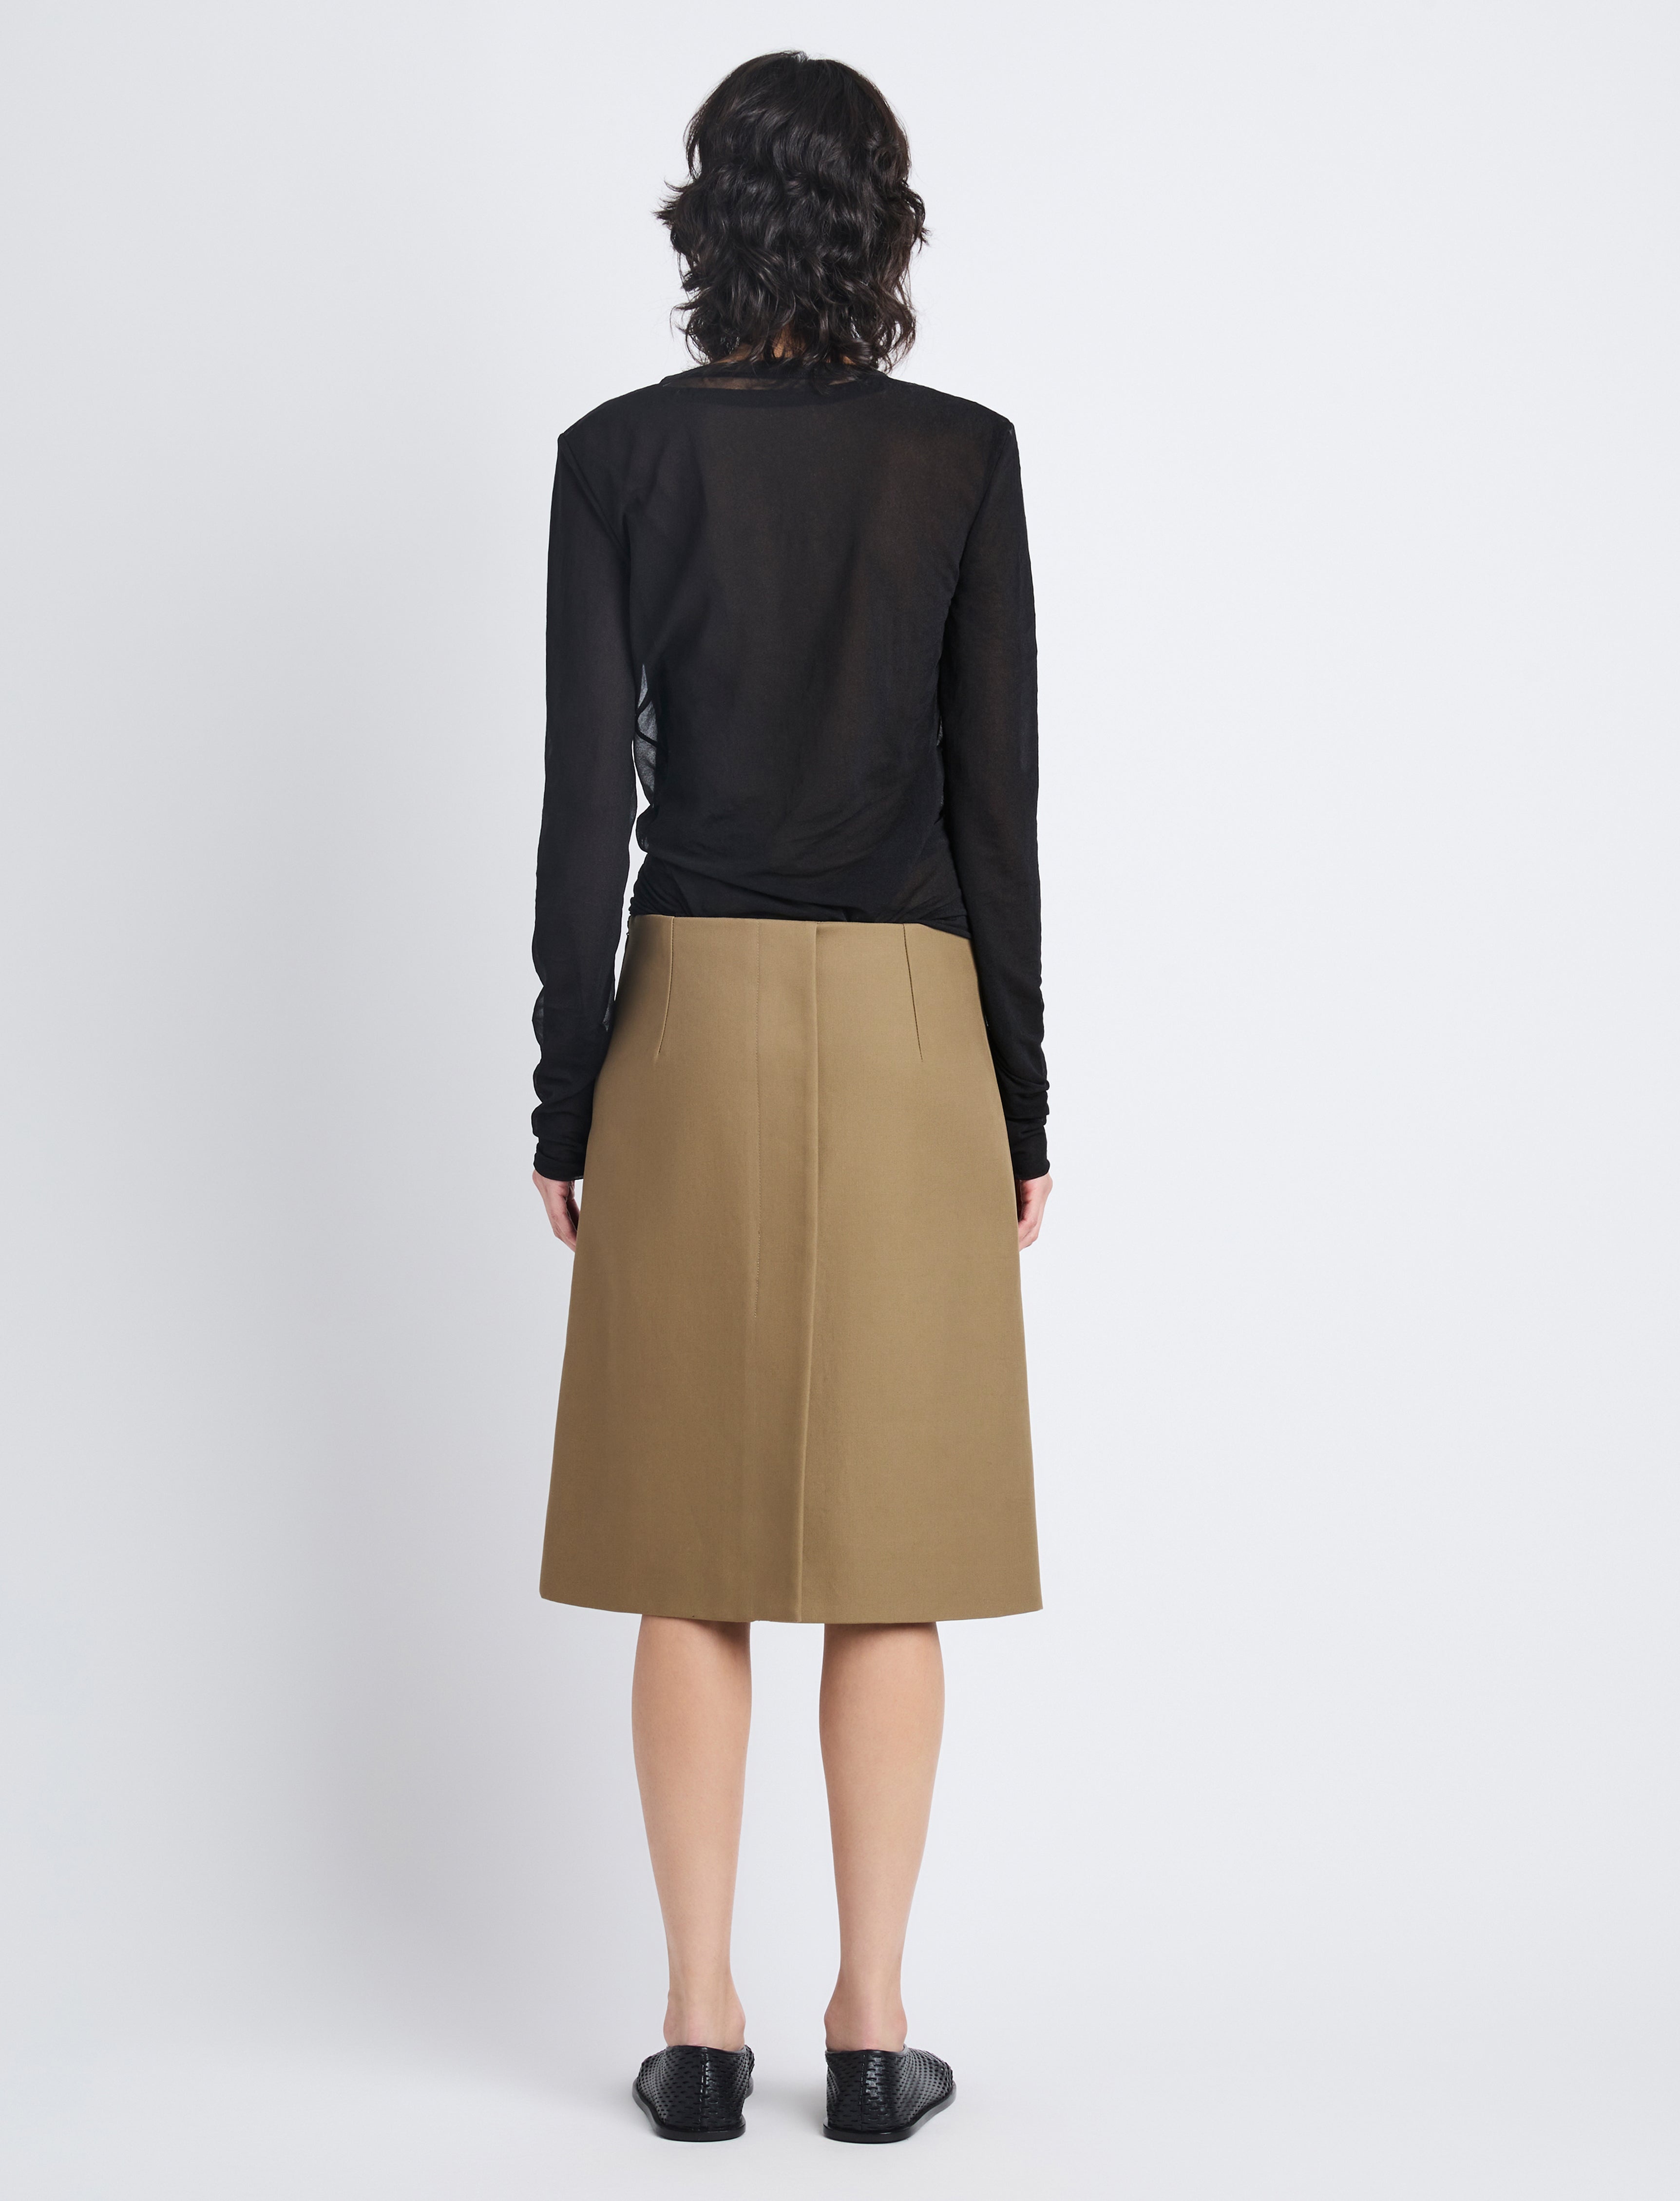 Adele Skirt in Eco Cotton Twill - 4